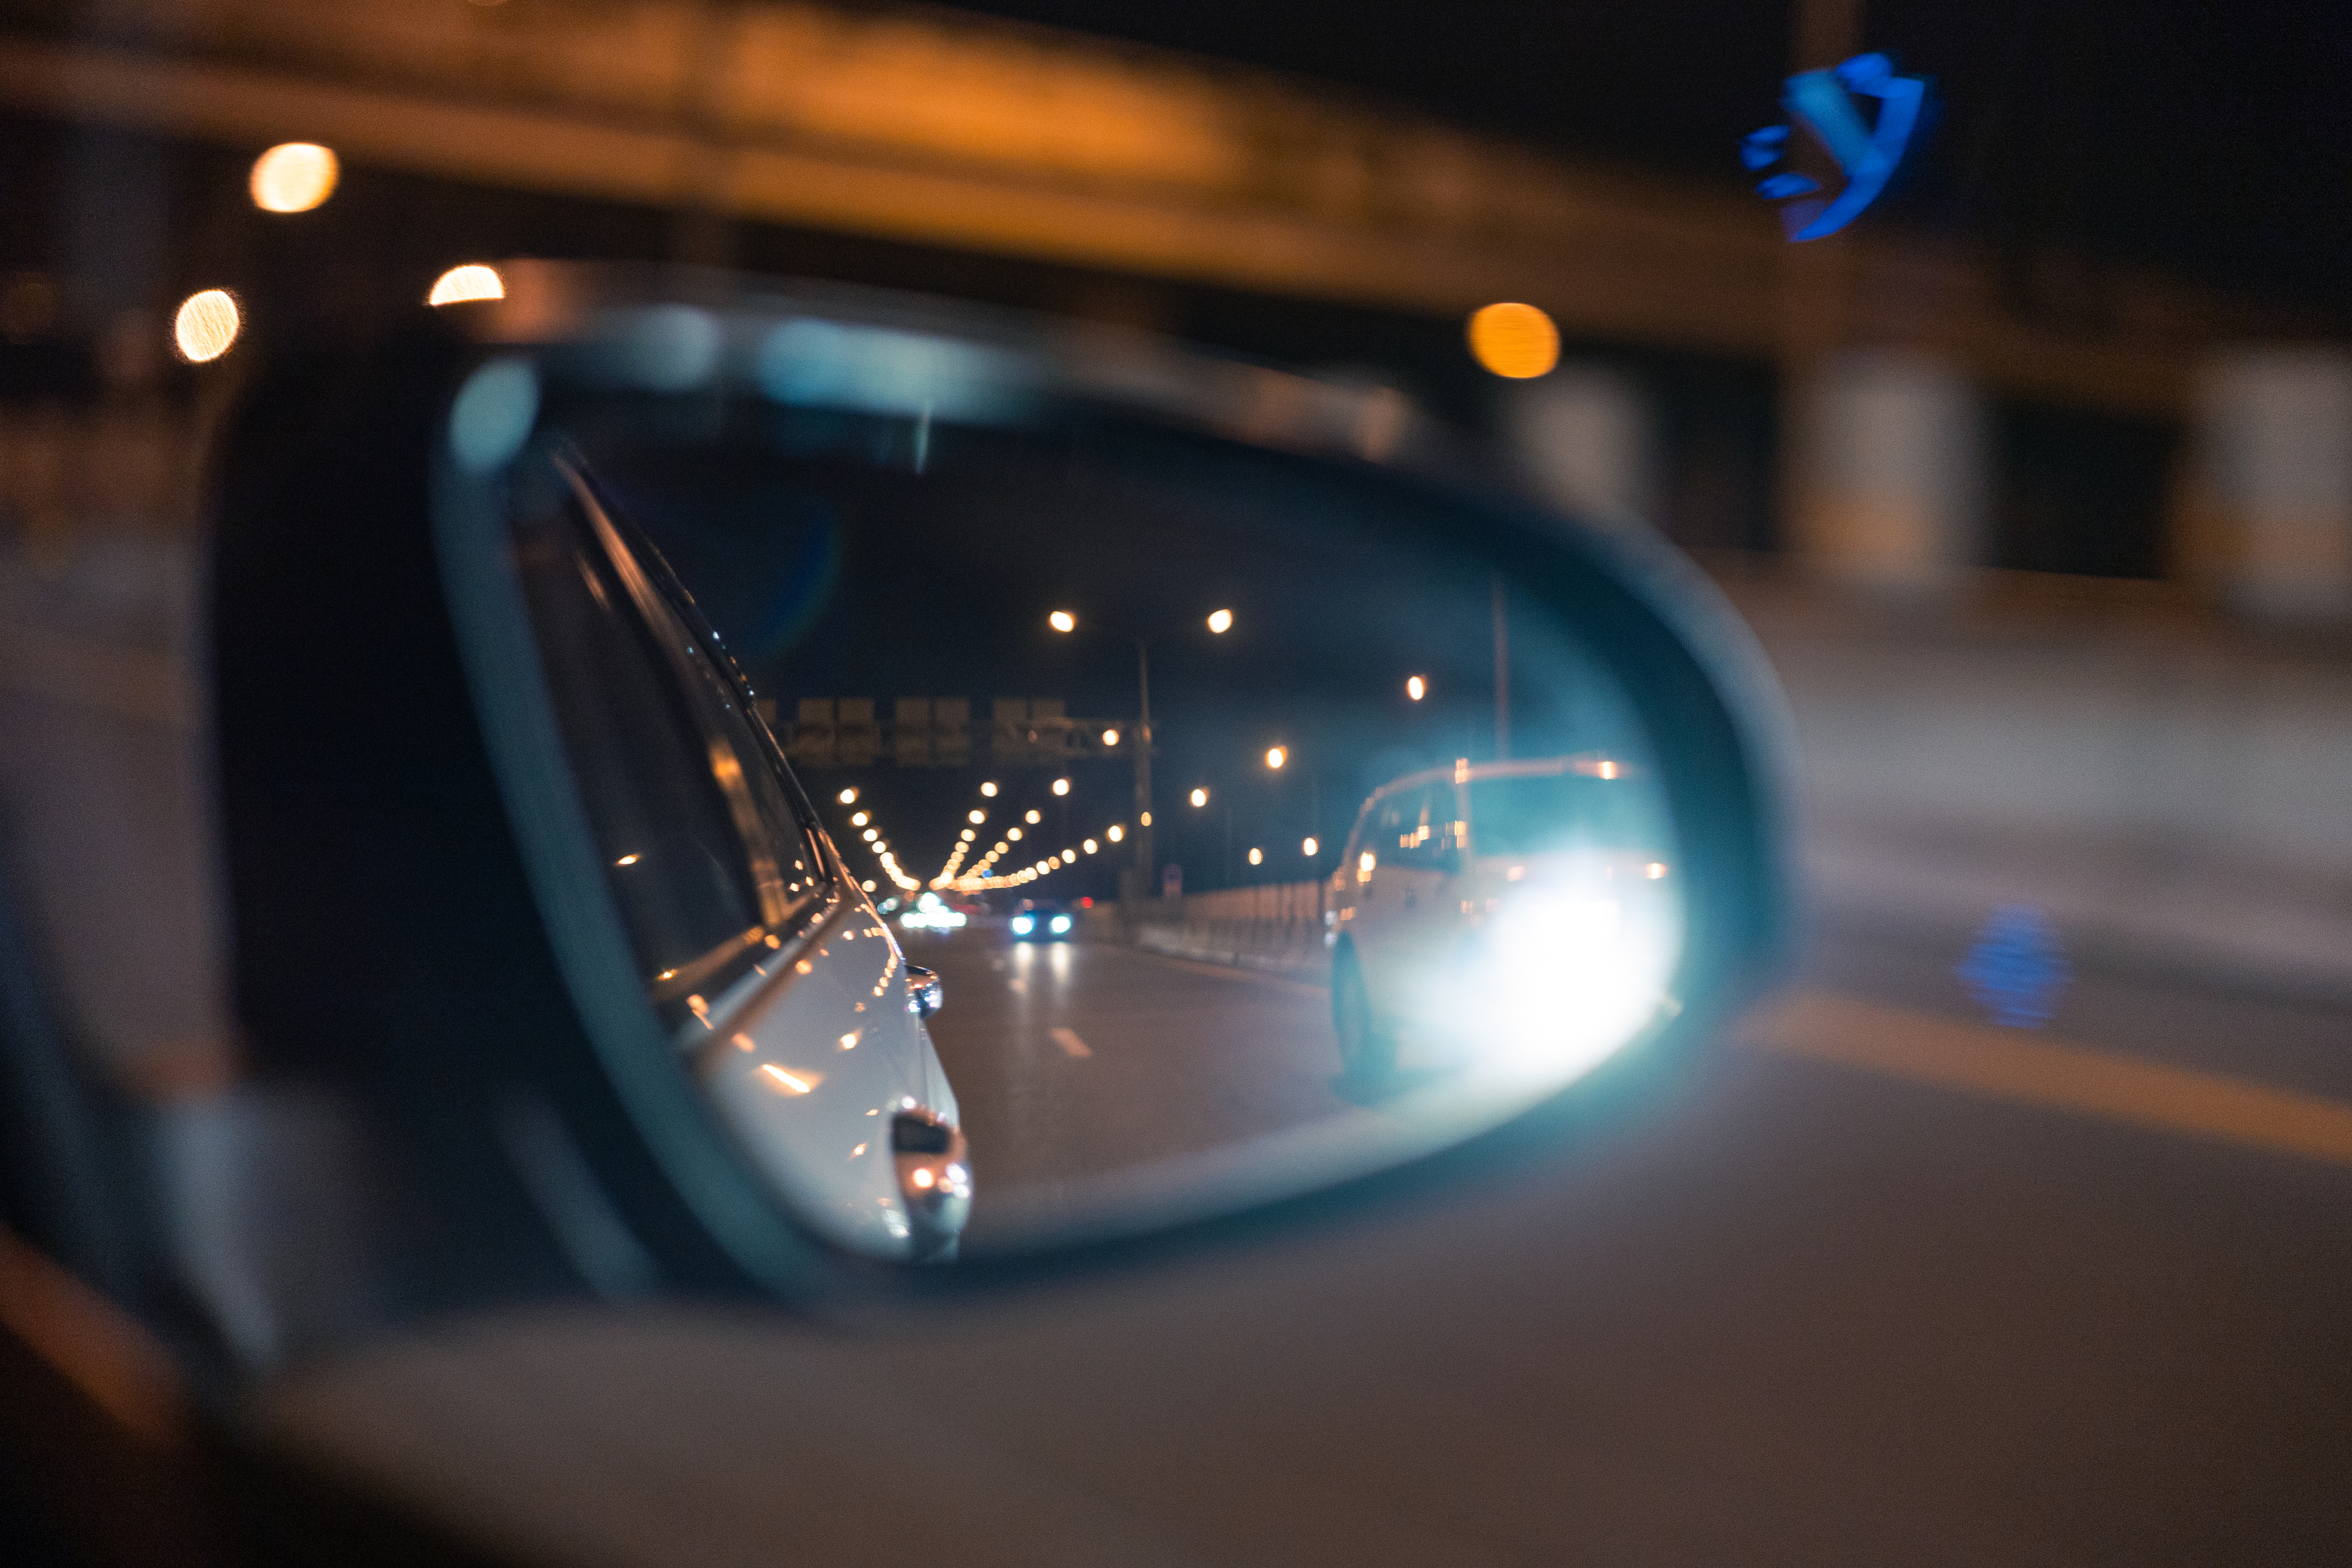 side-view mirror on car reflecting a highway